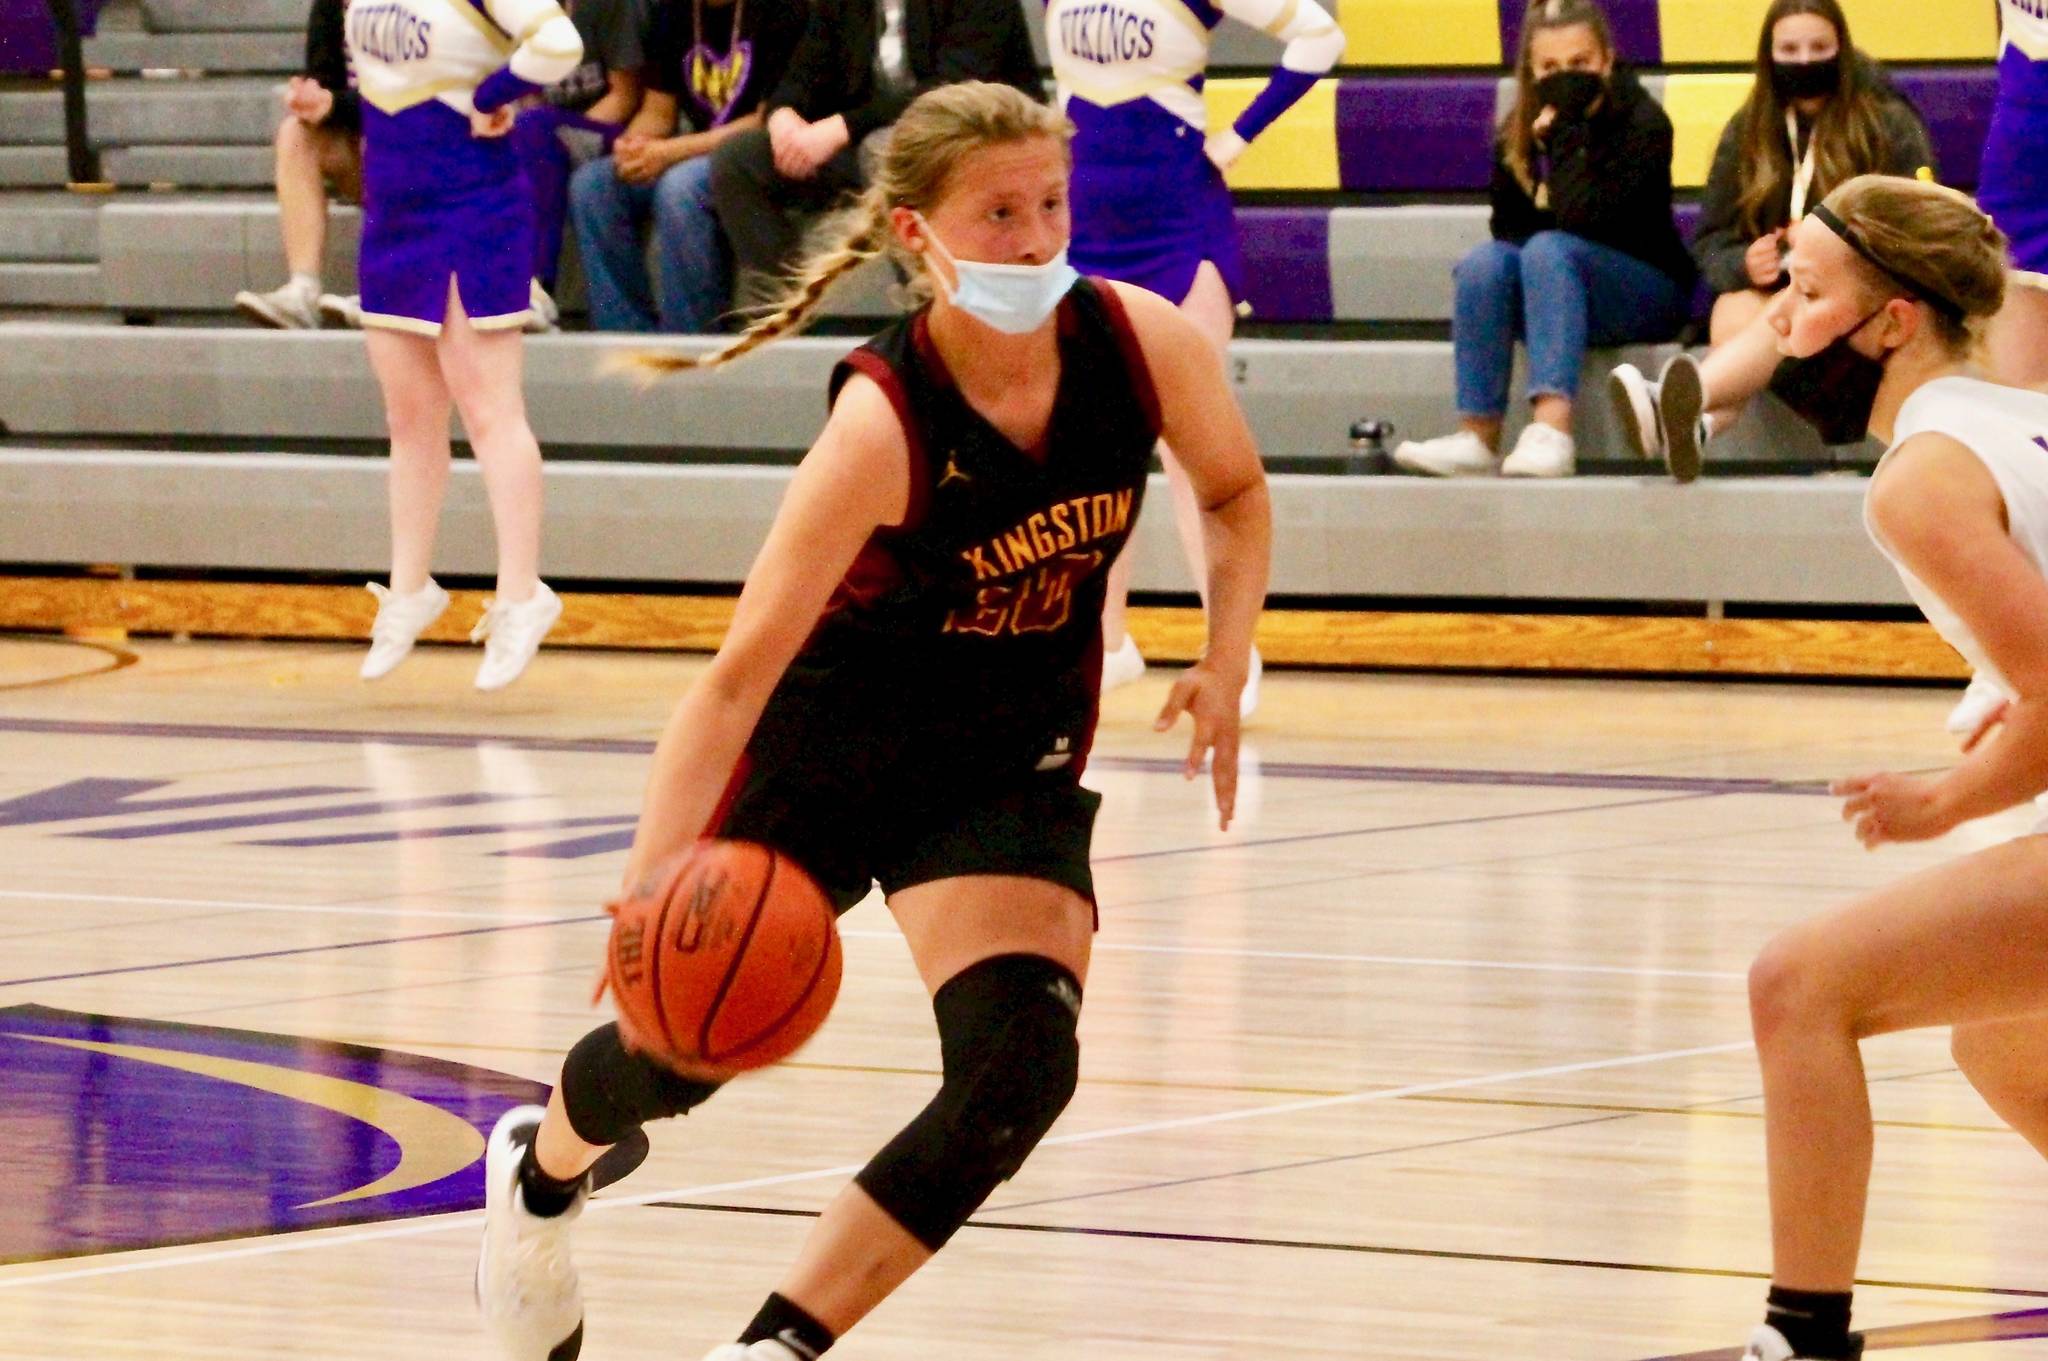 Kingston’s Ellee Brockman paced the offense on Opening Night, scoring 23 points in a 49-40 win over North Kitsap. (Mark Krulish/Kitsap News Group)